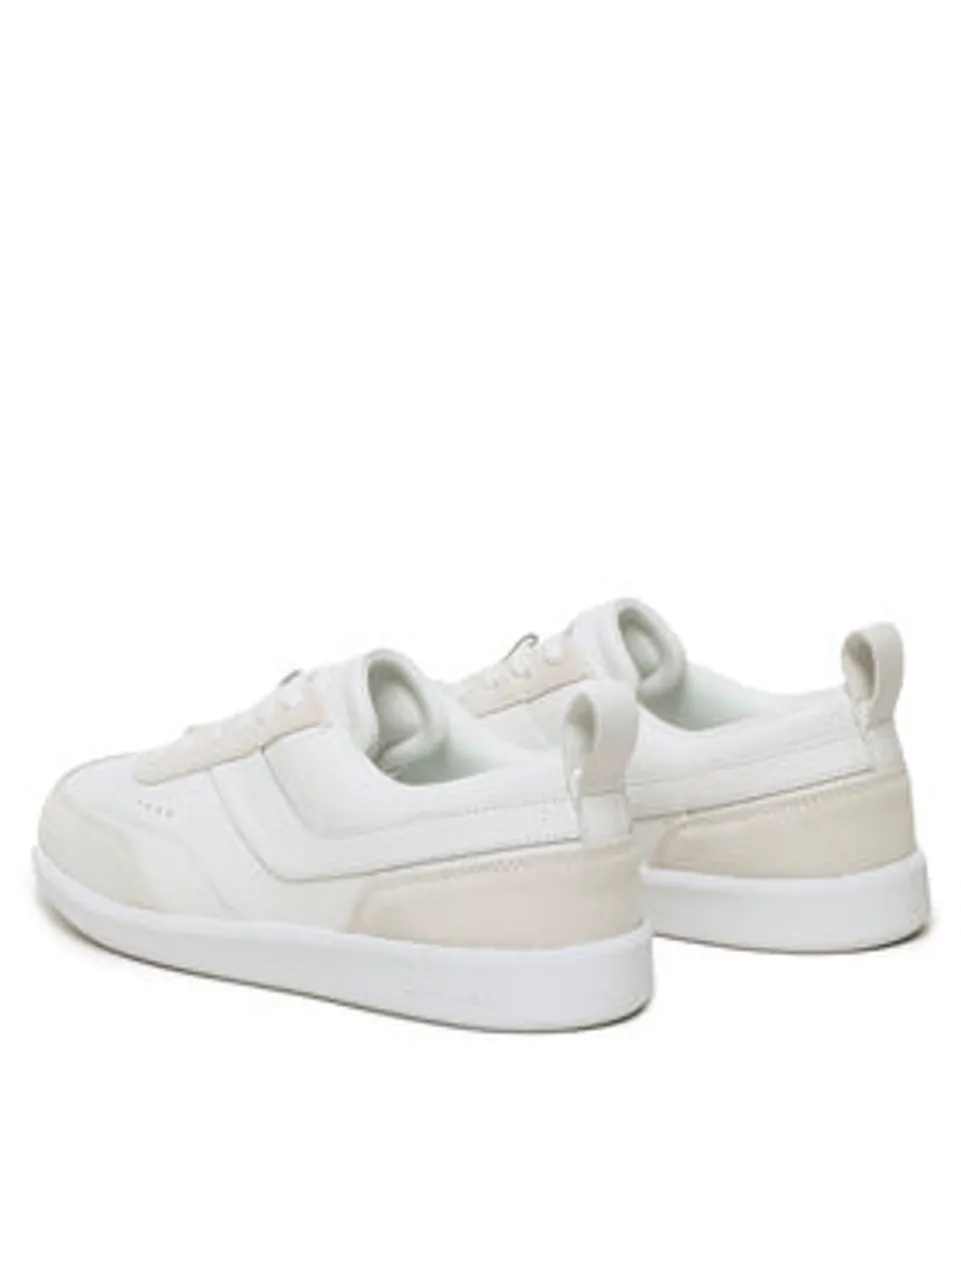 Calvin Klein Sneakers Low Top Lace Up Lth Mix HM0HM00851 Weiß